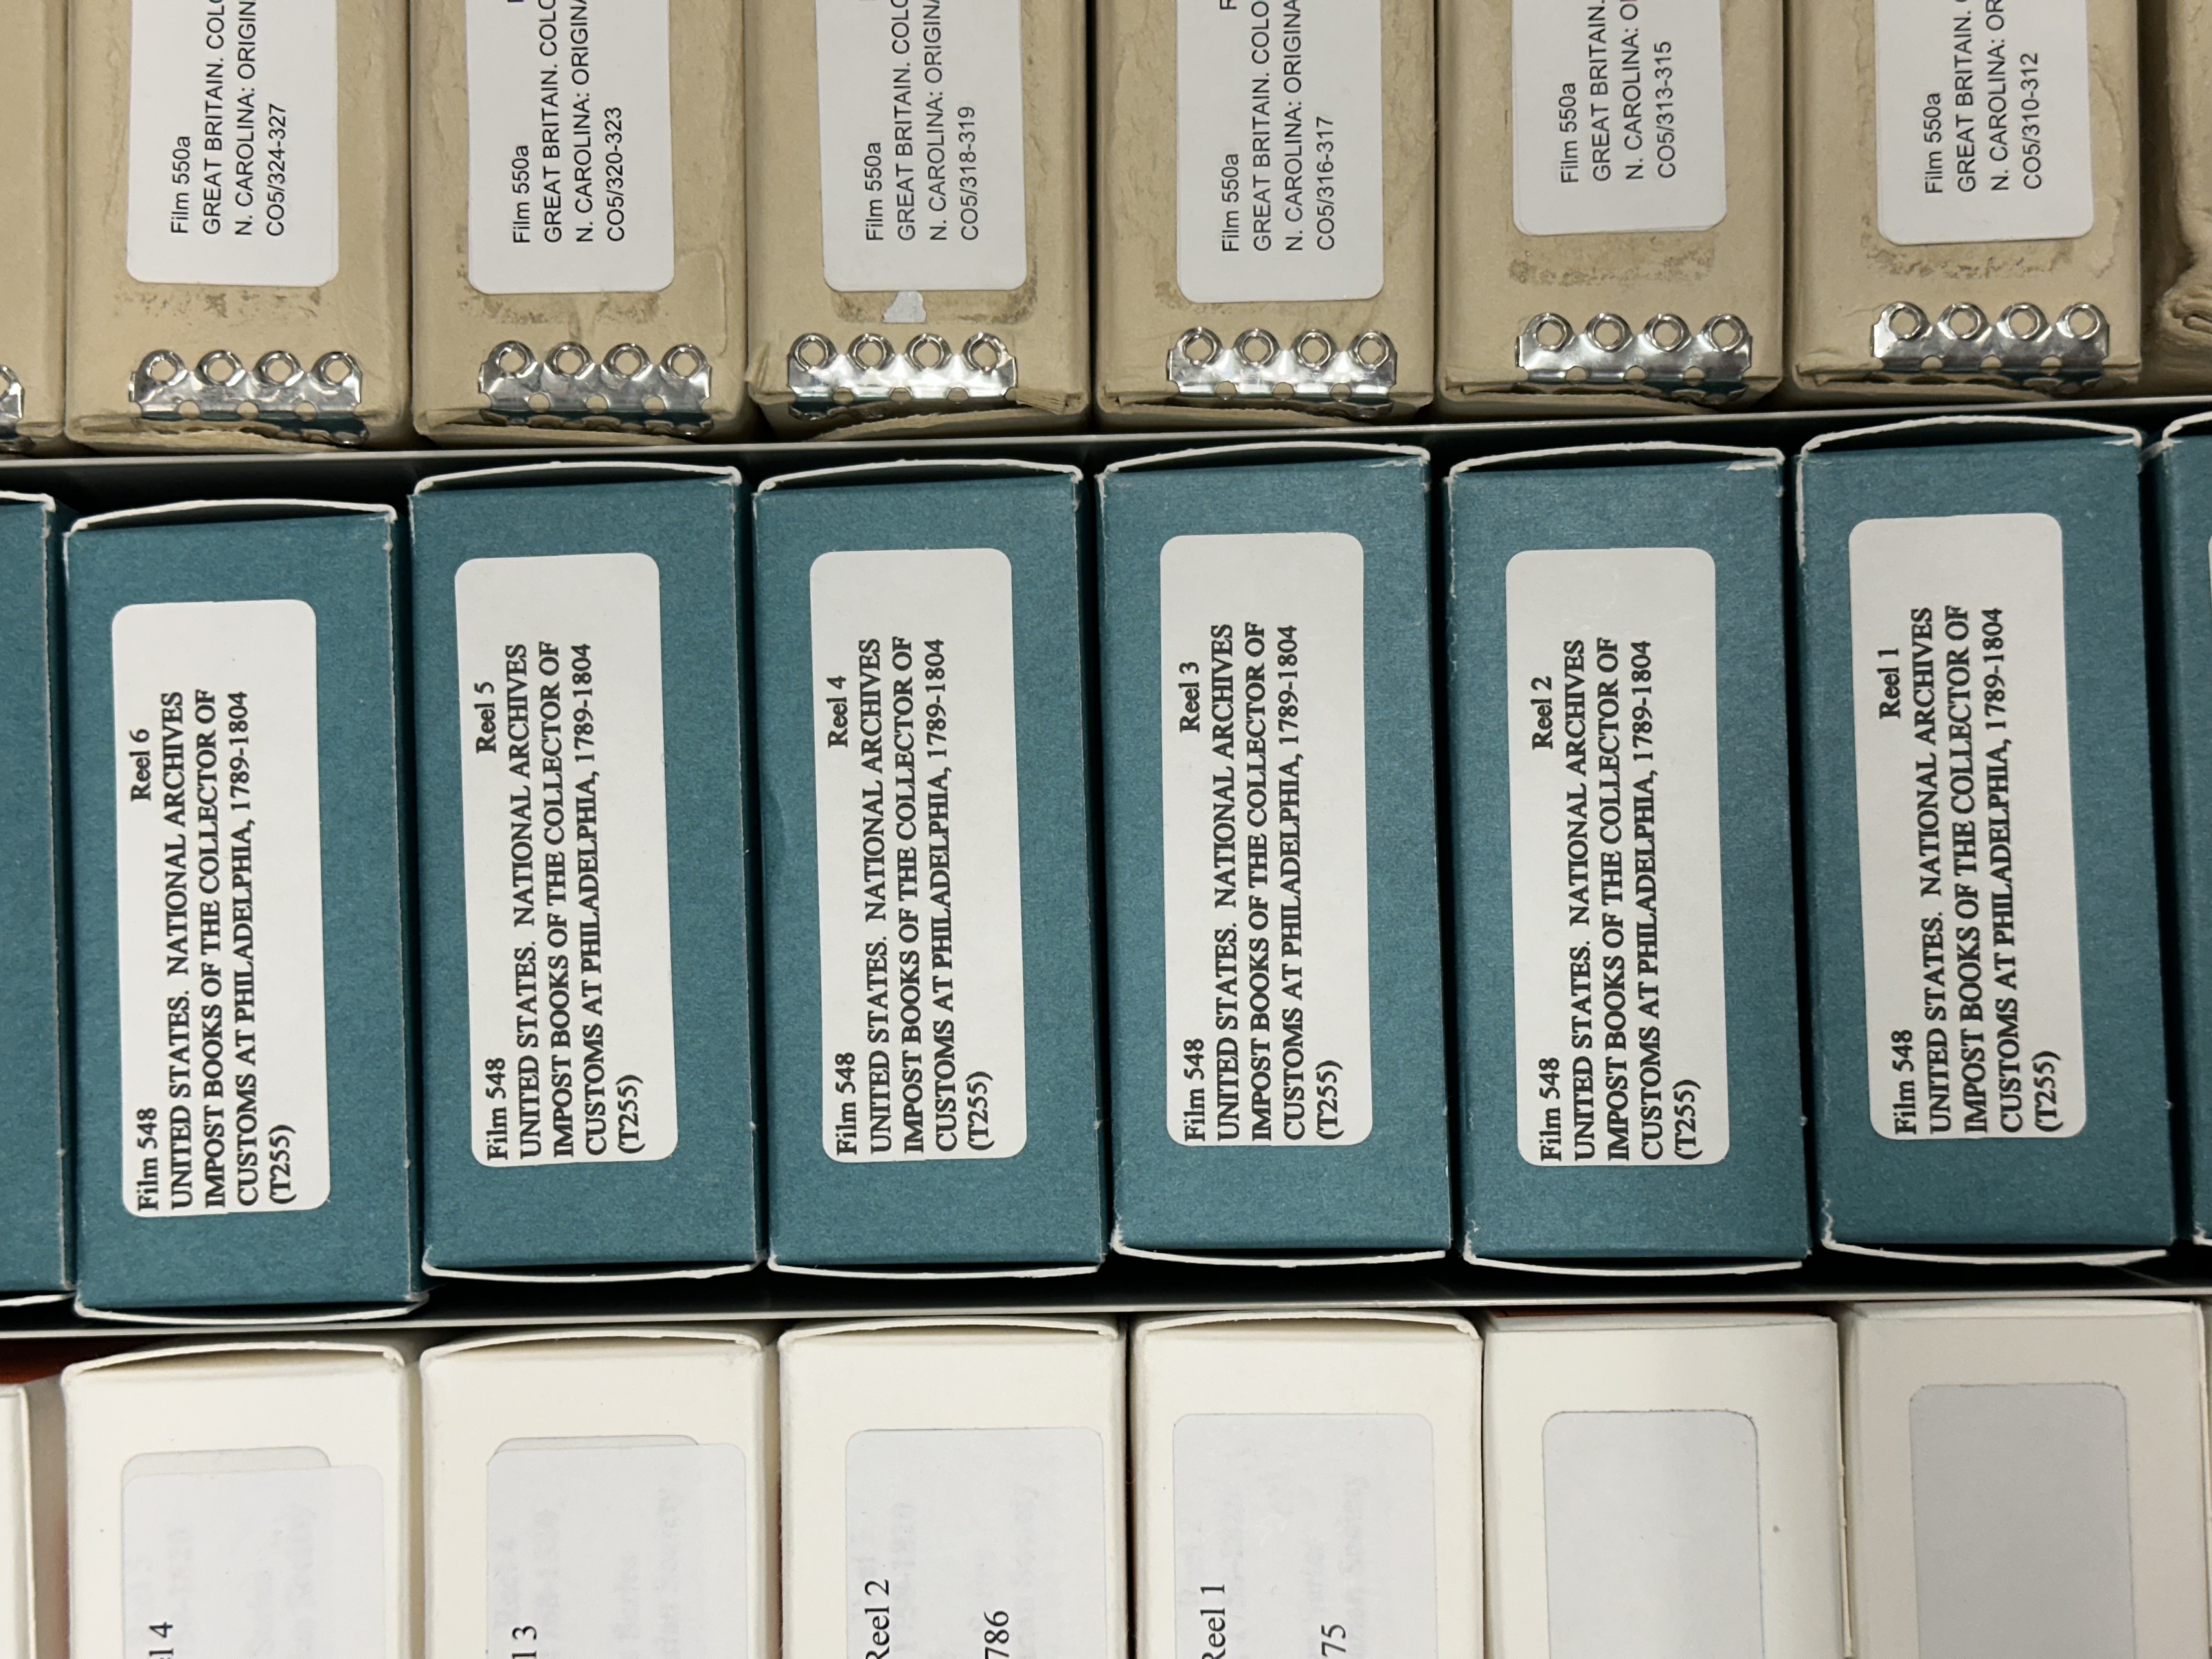 photo of reels of microfilm in boxes